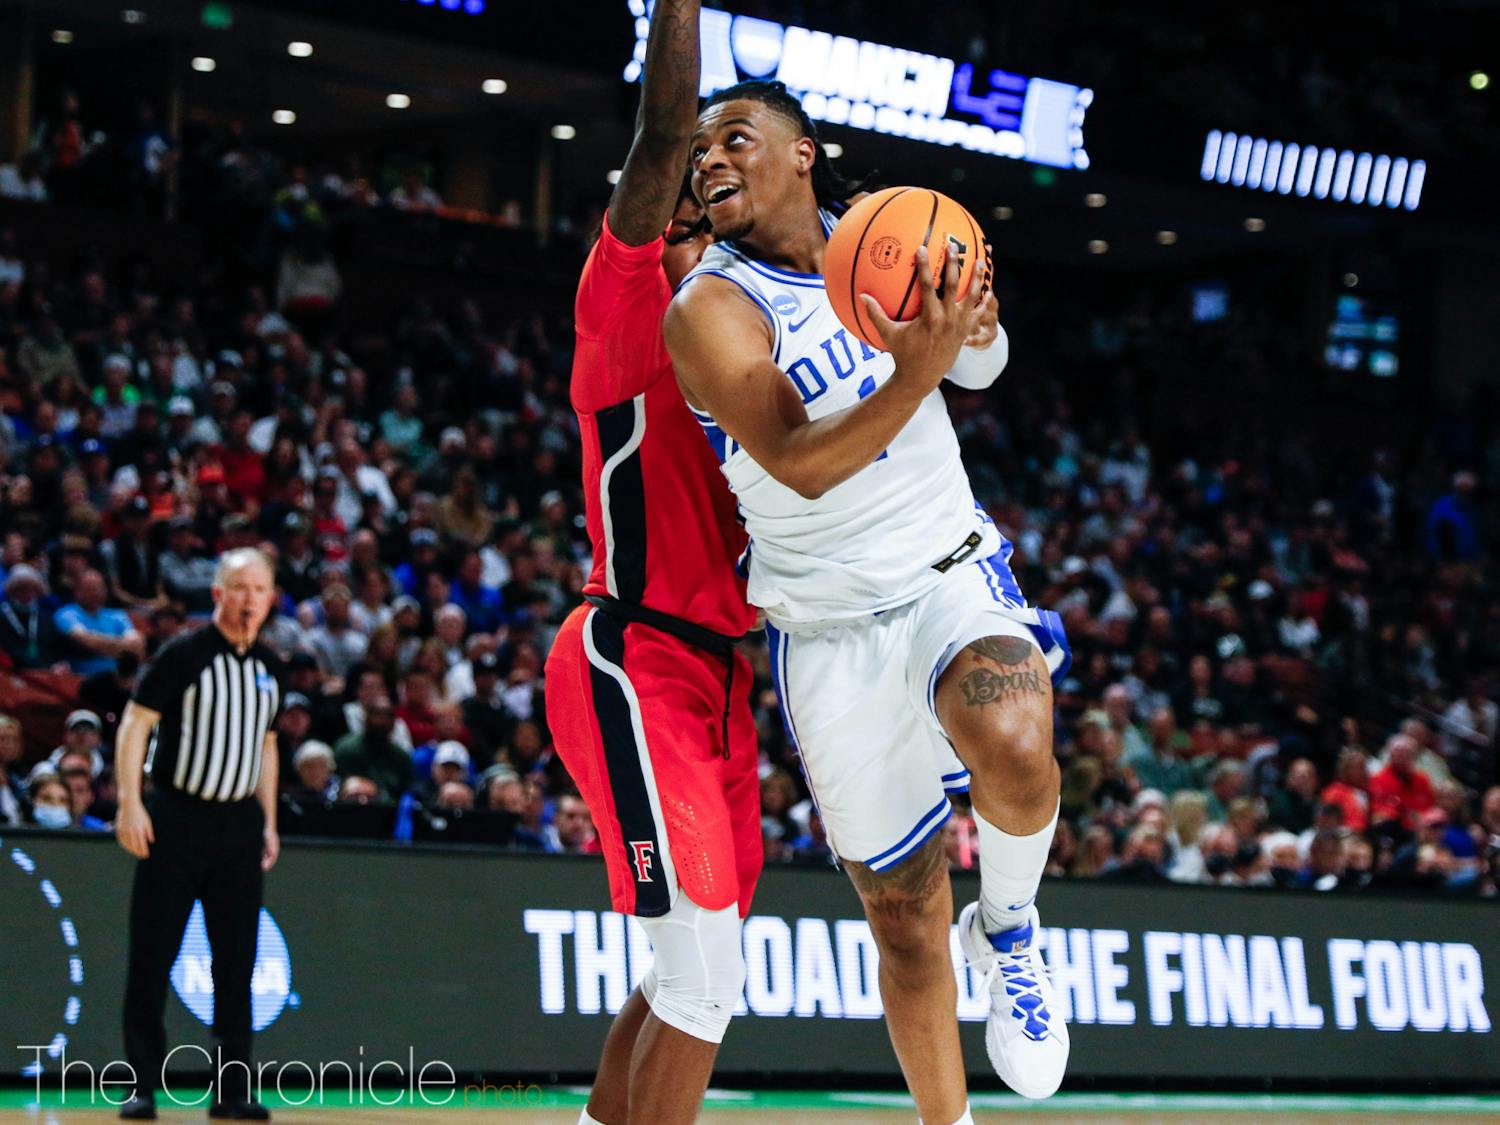 Duke's current roster features a mix of freshman and veteran talent.